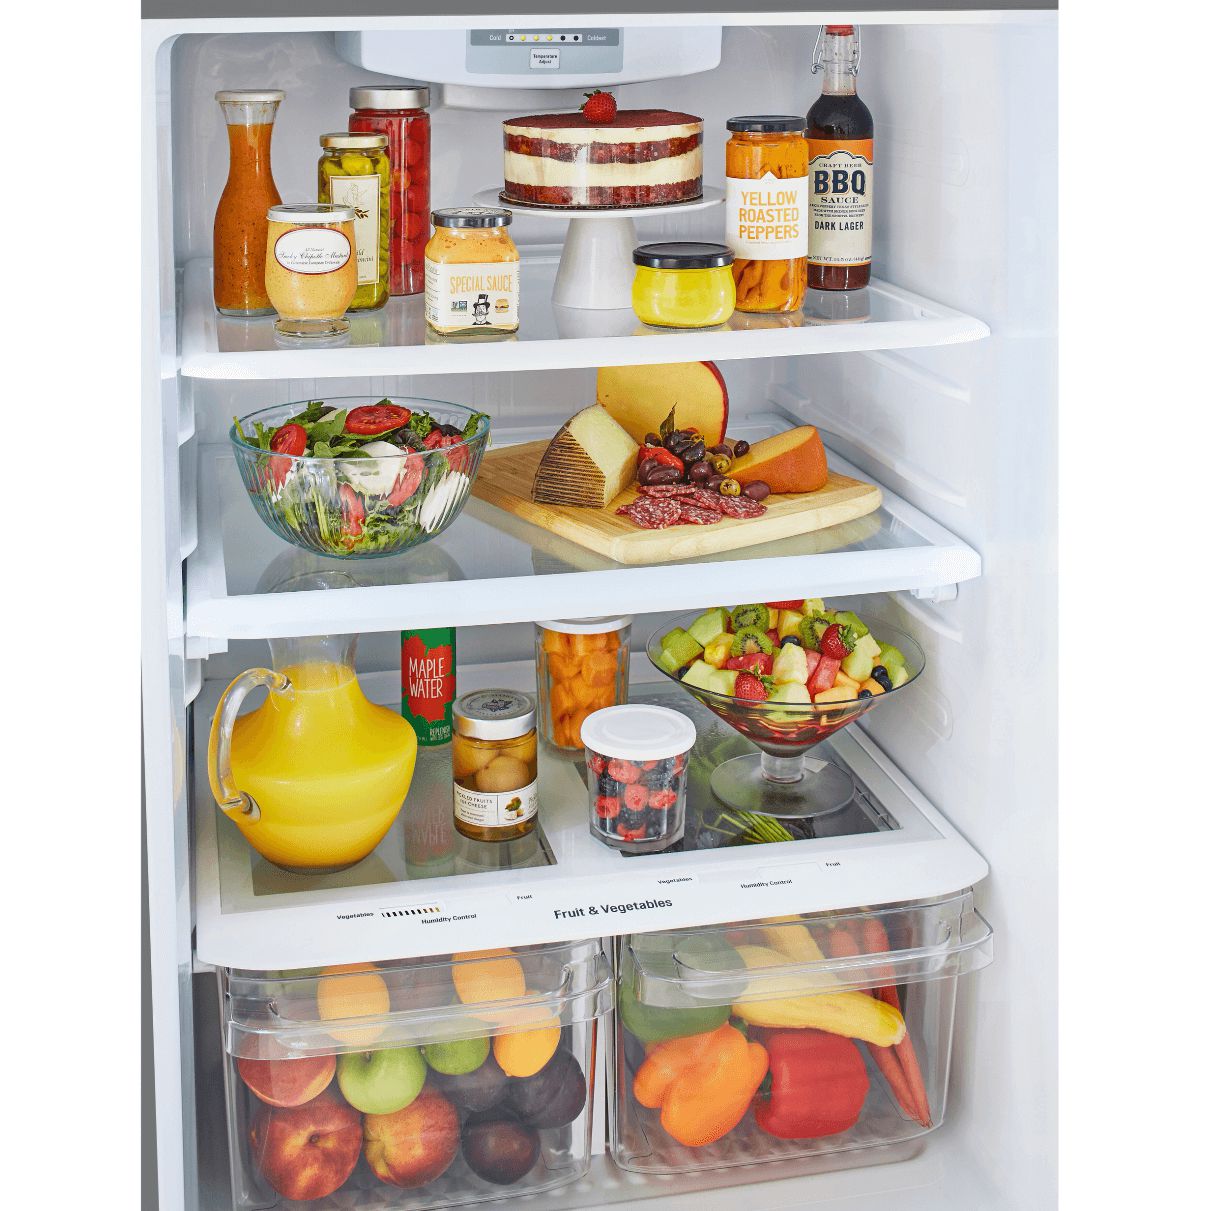 LG 30 Inch Top Mount Refrigerator in Stainless Steel 20 Cu. Ft. (LTCS20020S)